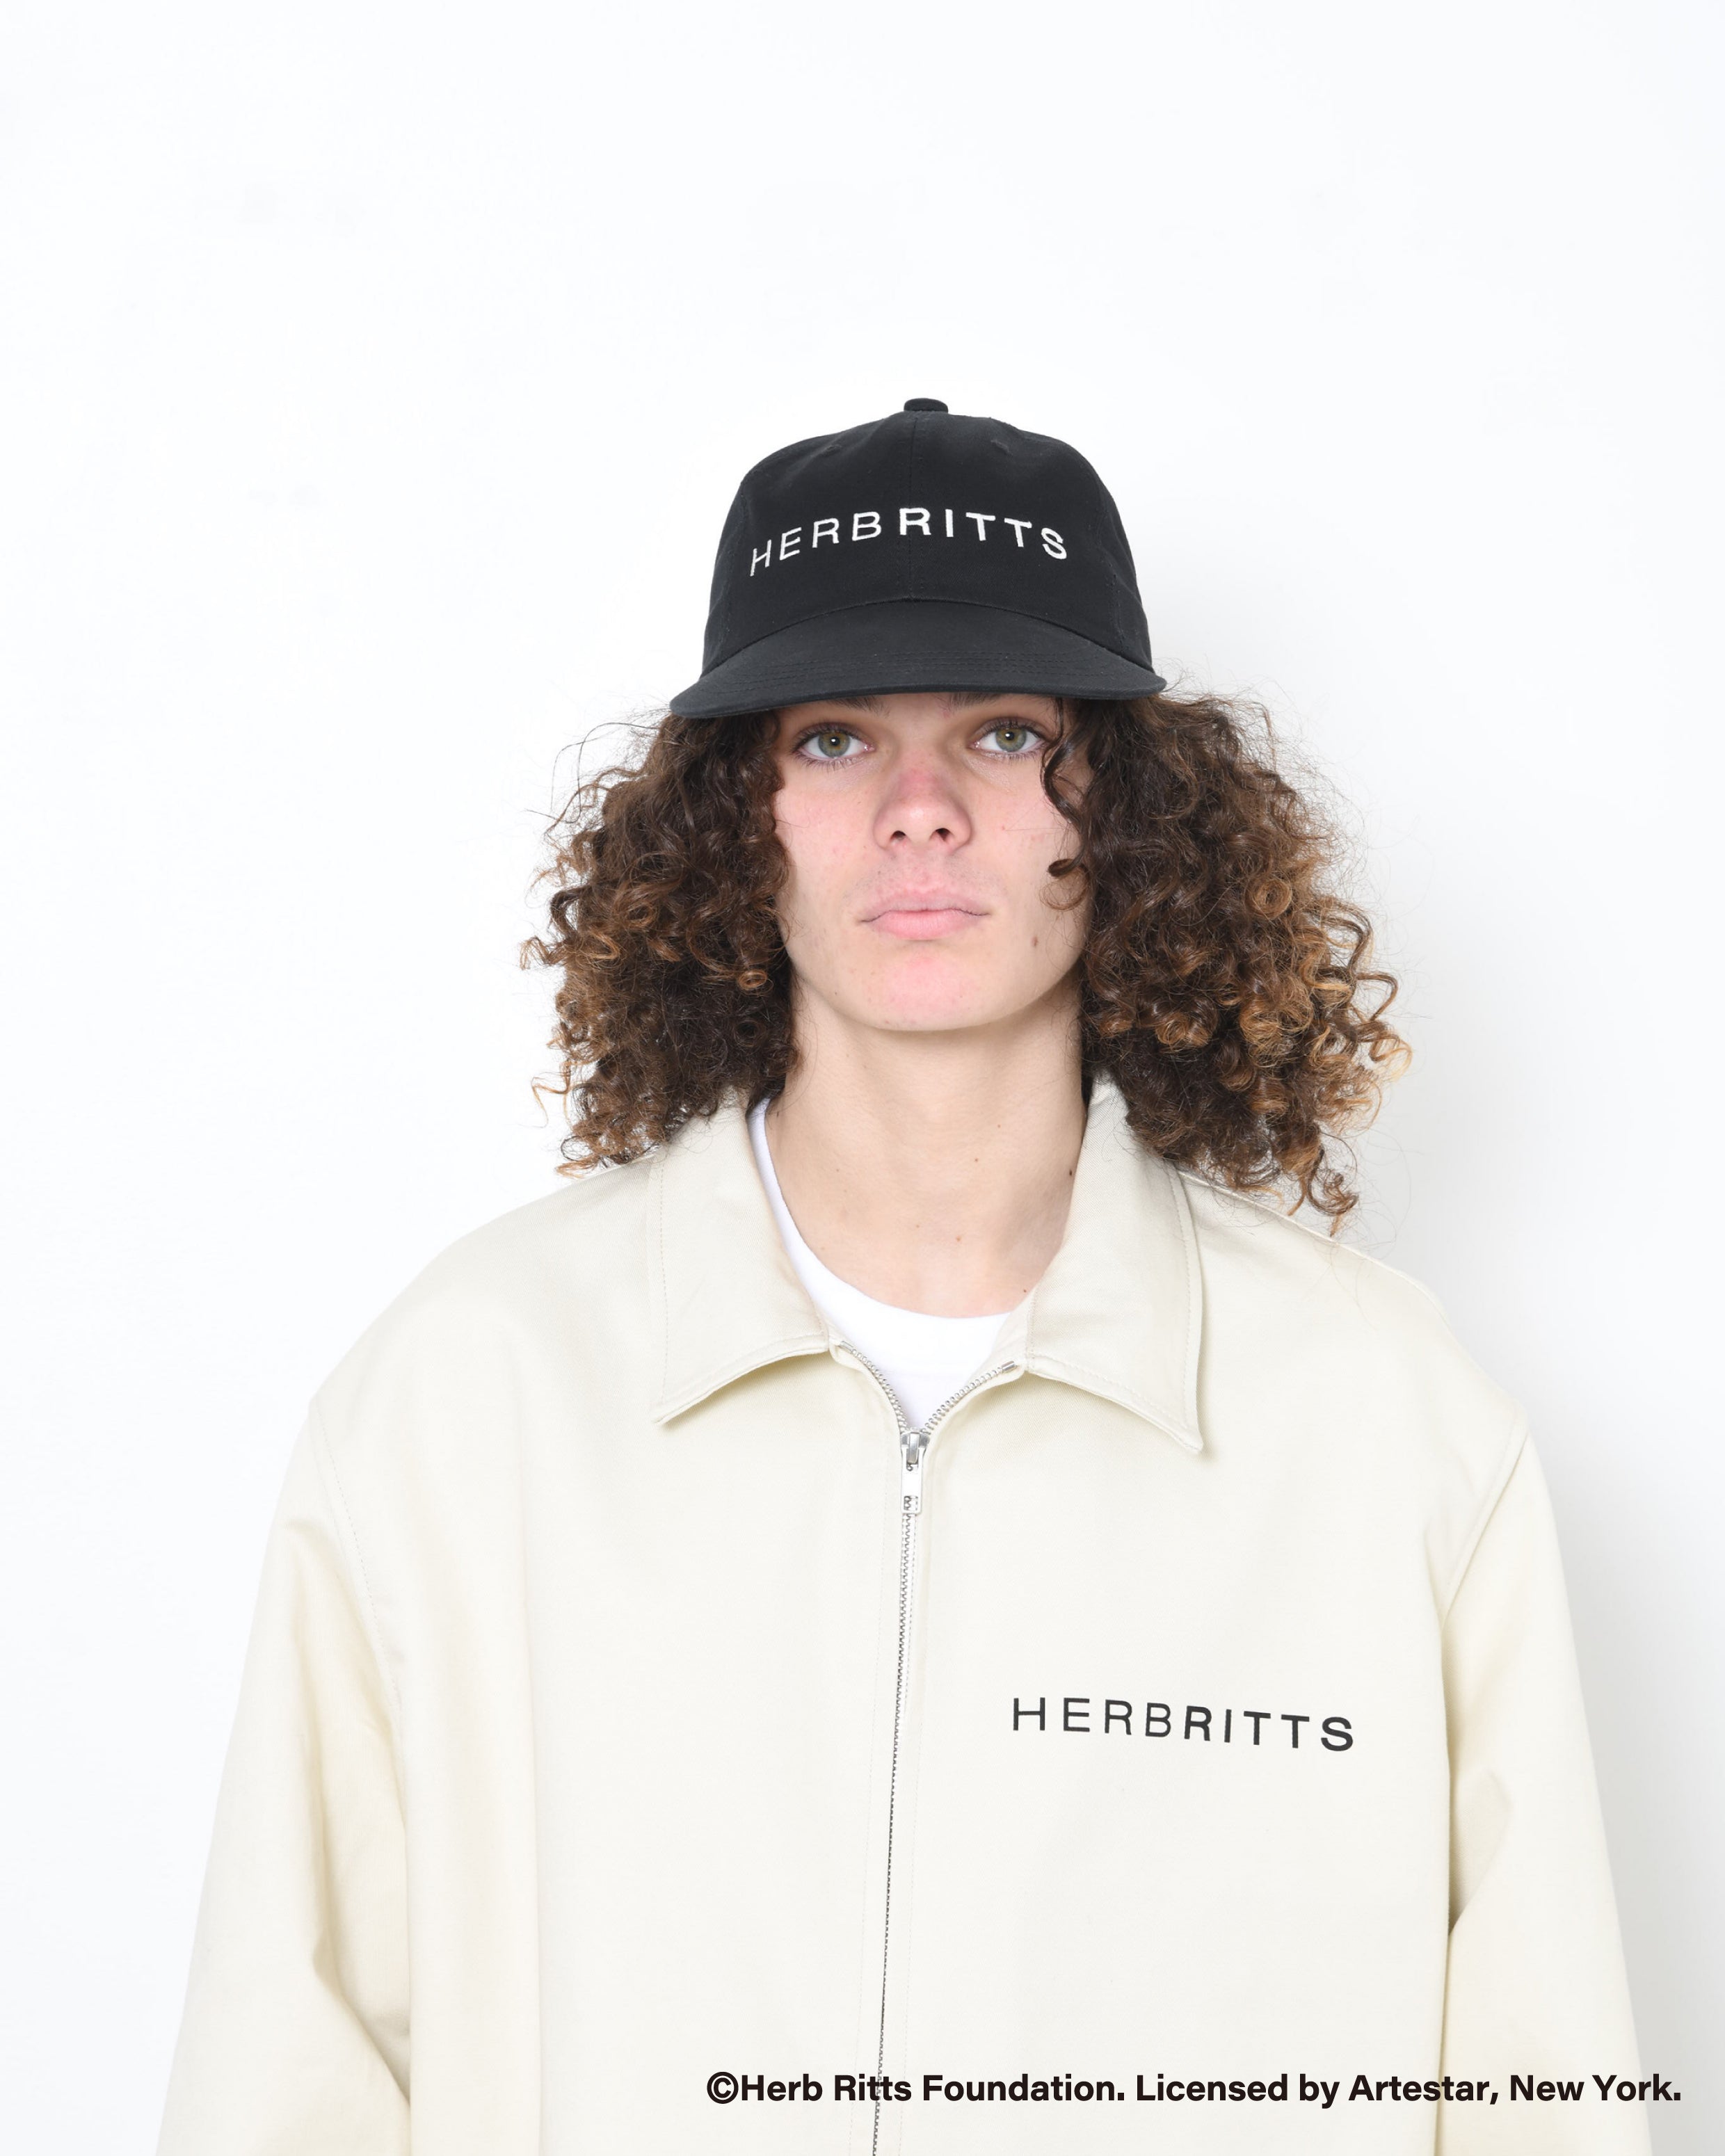 BOW WOW / HERB RITTS COLLECTION】HERB RITTS LOGO CAP – C30 - BOW 